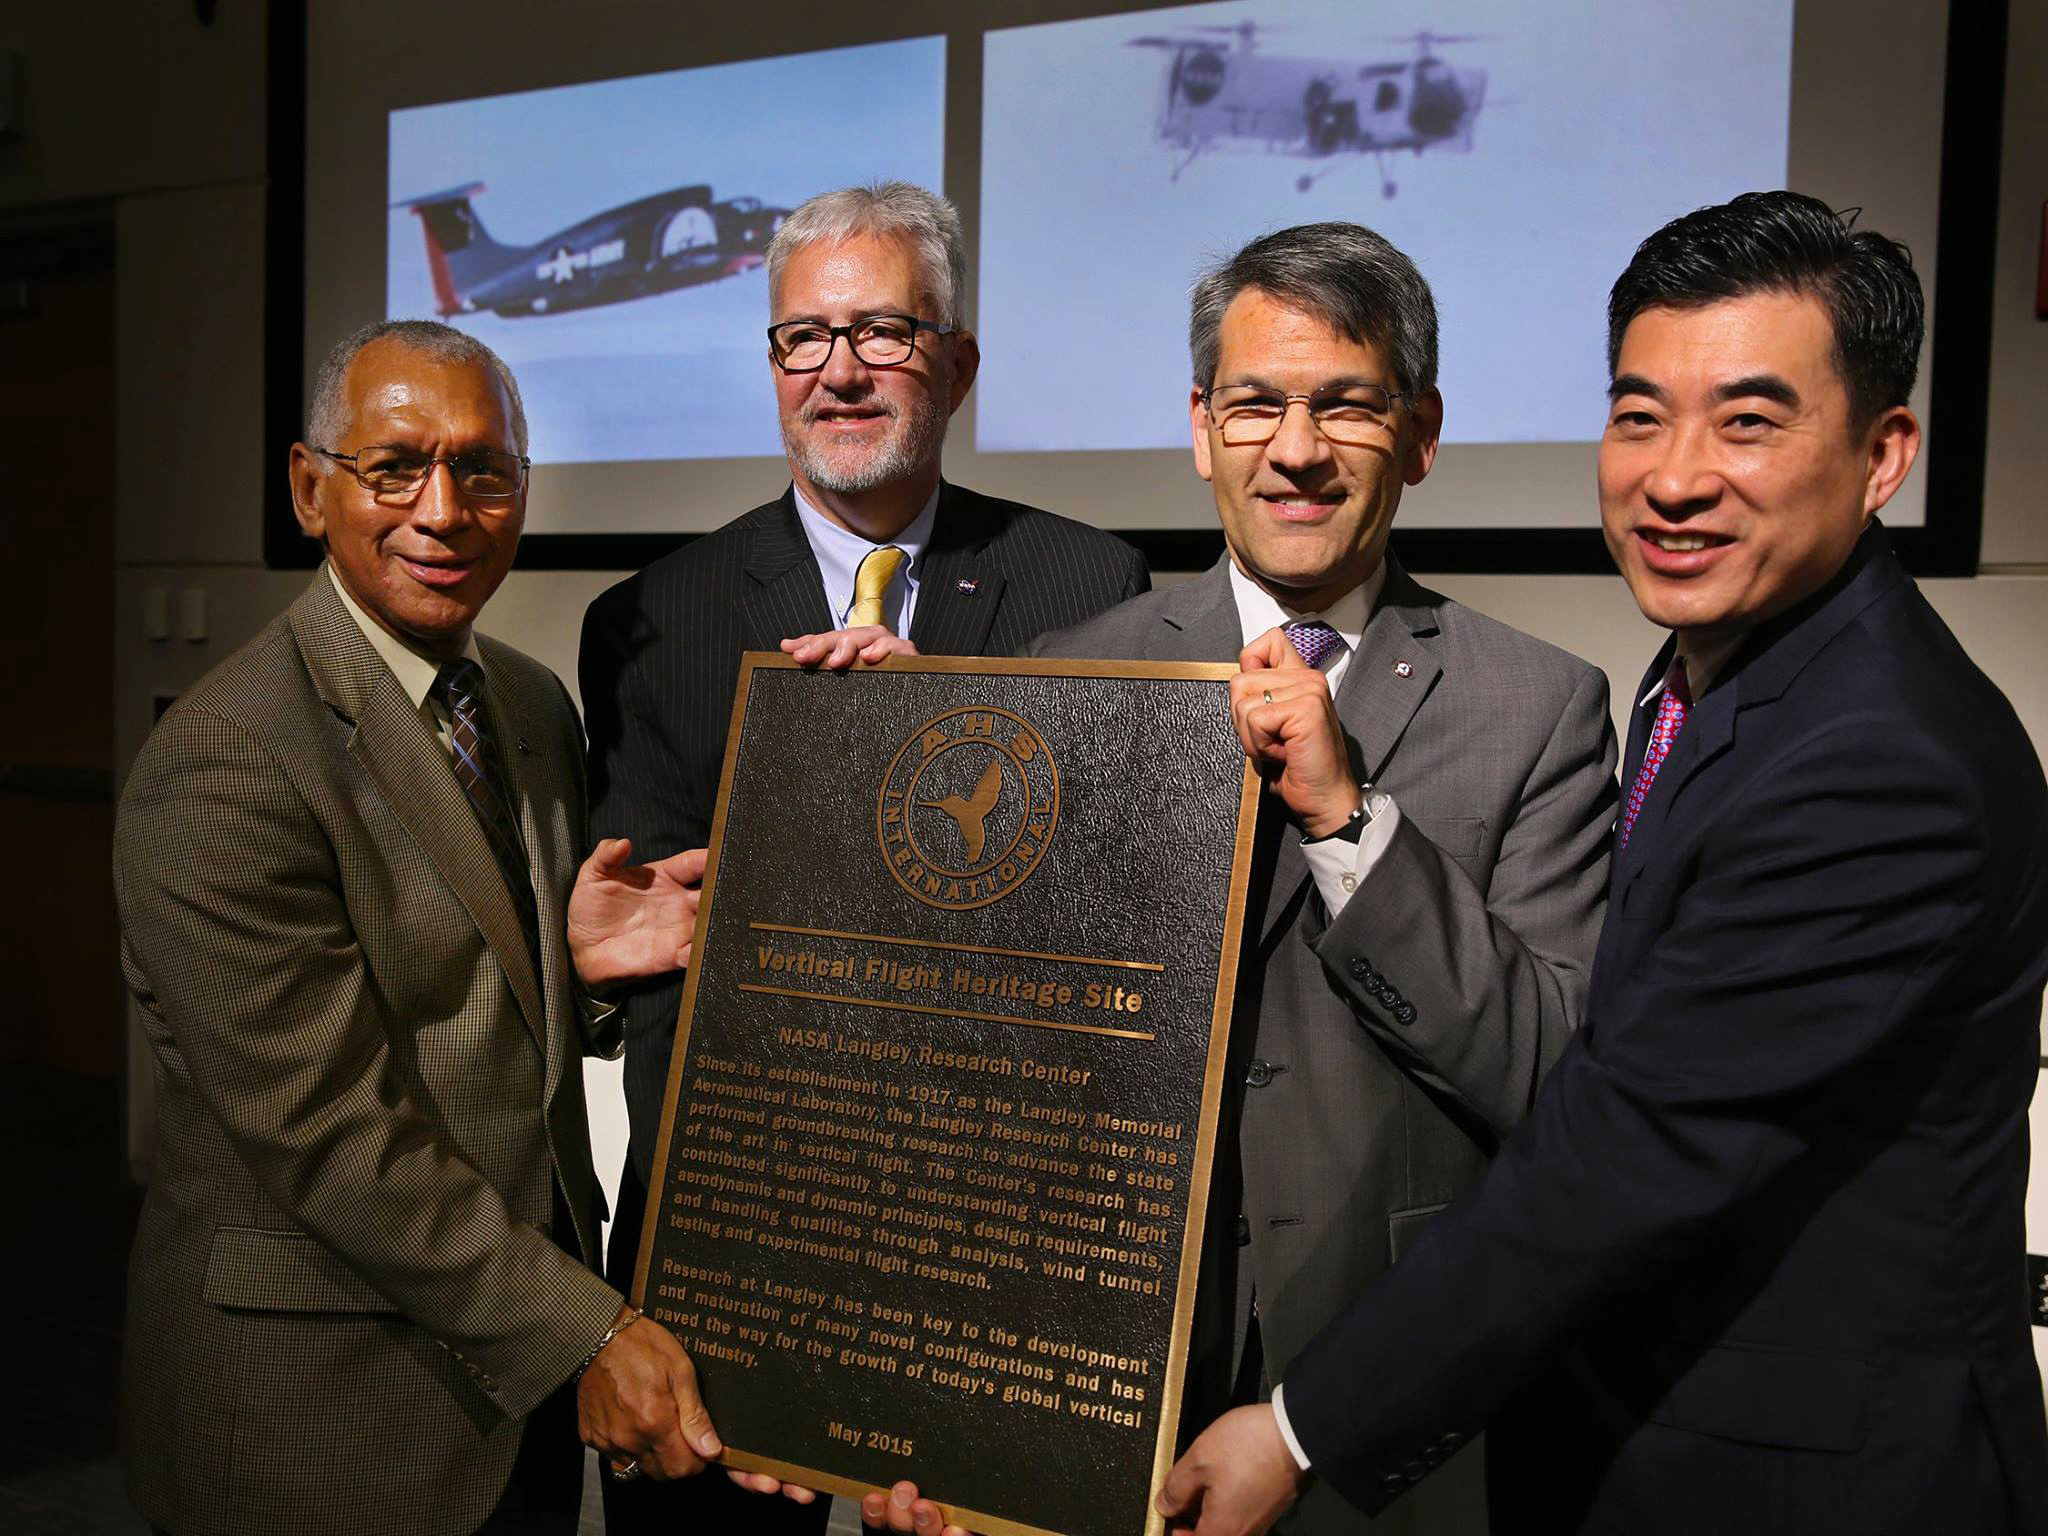 NASA Langley recognized for contributions to the advancement of helicopters and other vertical flight aircraft May 8, 2015